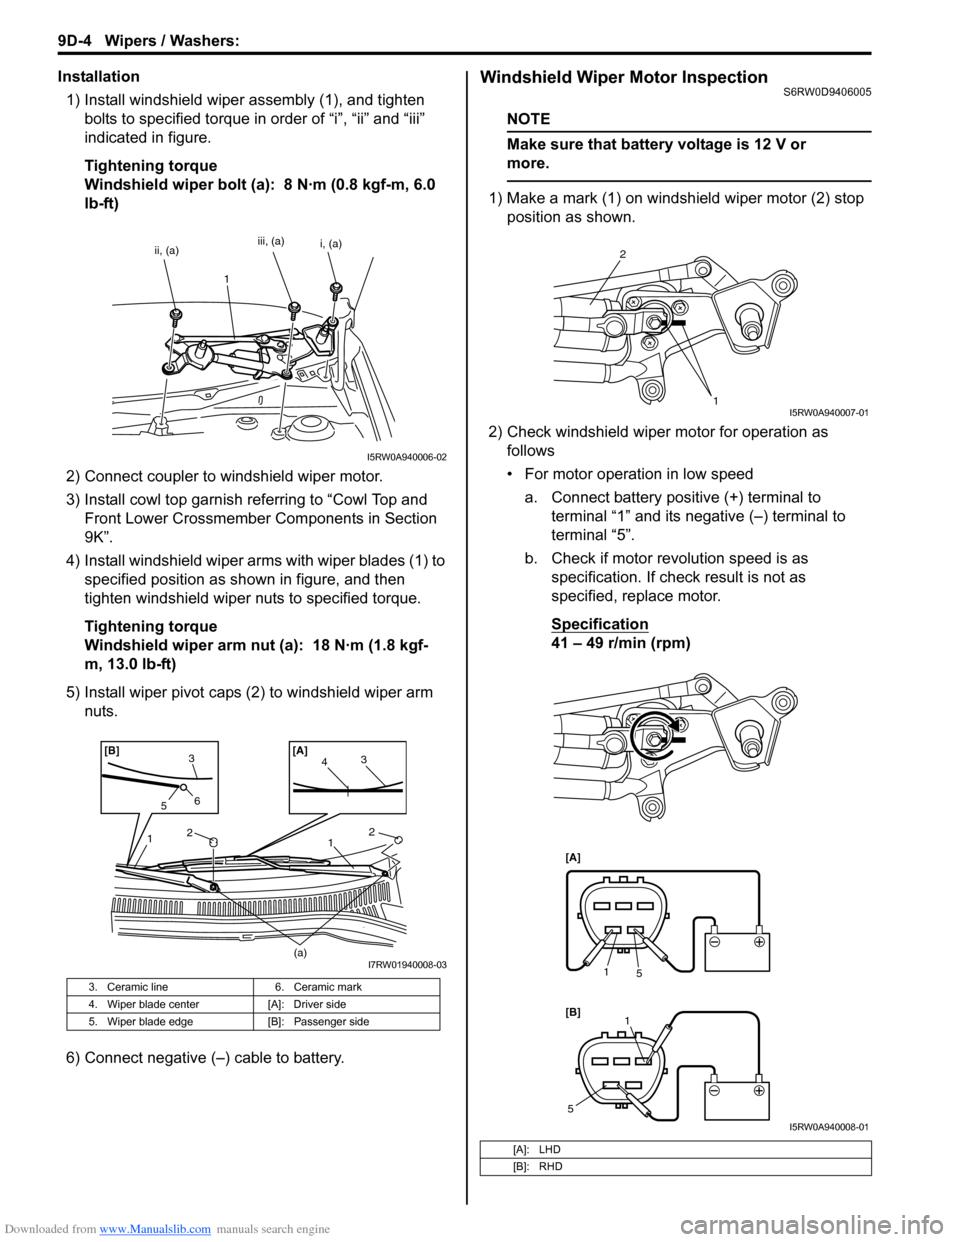 SUZUKI SX4 2006 1.G Service Workshop Manual Downloaded from www.Manualslib.com manuals search engine 9D-4 Wipers / Washers: 
Installation
1) Install windshield wiper assembly (1), and tighten 
bolts to specified torque in order of “i”, “i